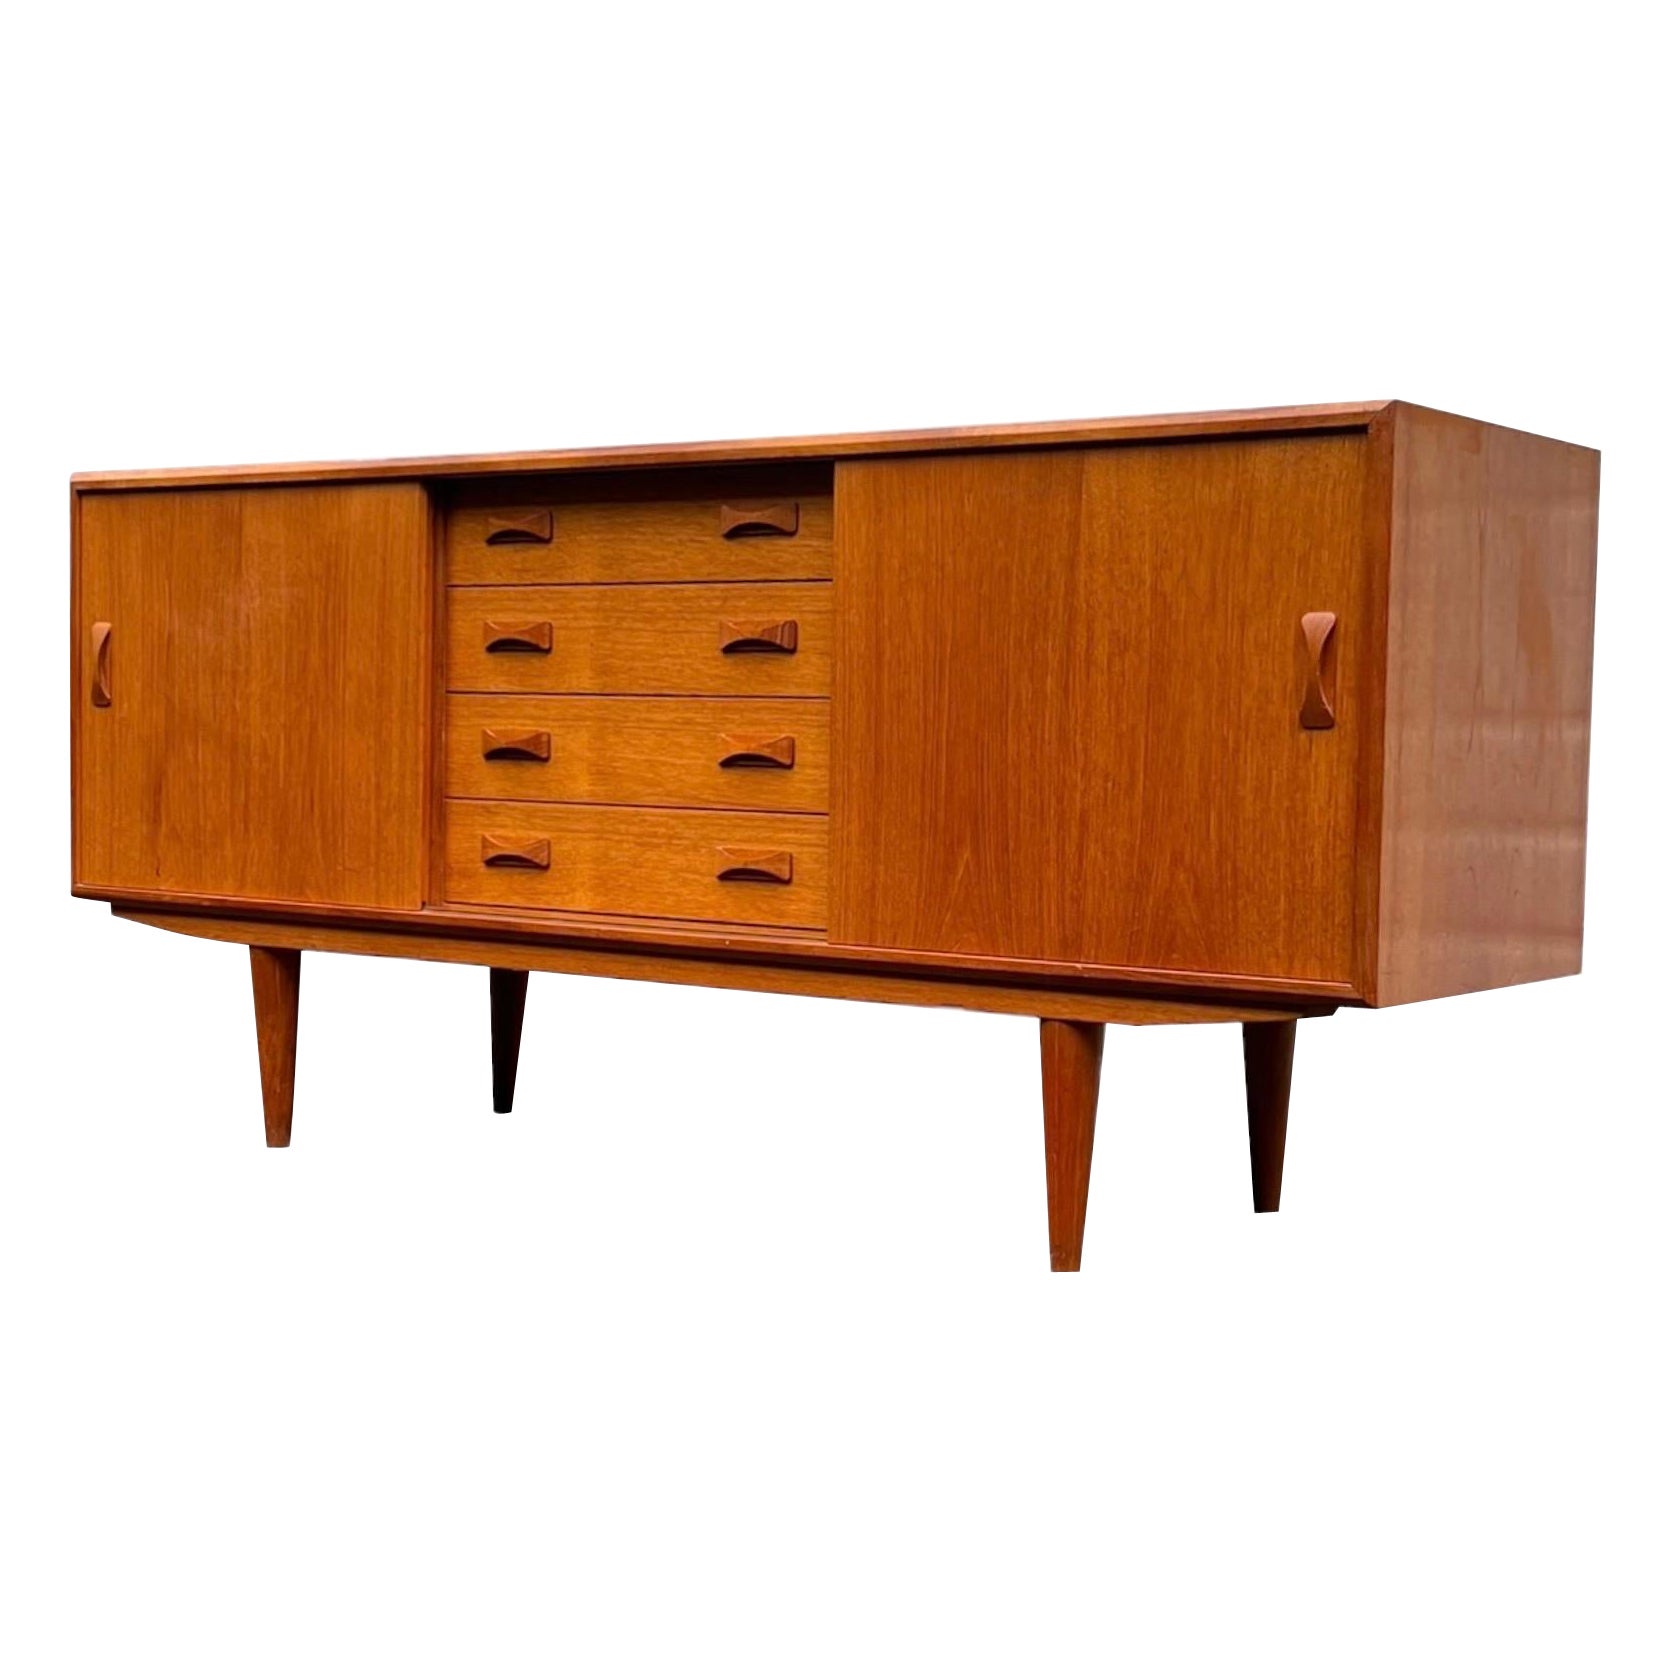 Vintage Danish Mid-Century Modern Credenza by Clausen and Sons Dovetail Drawers